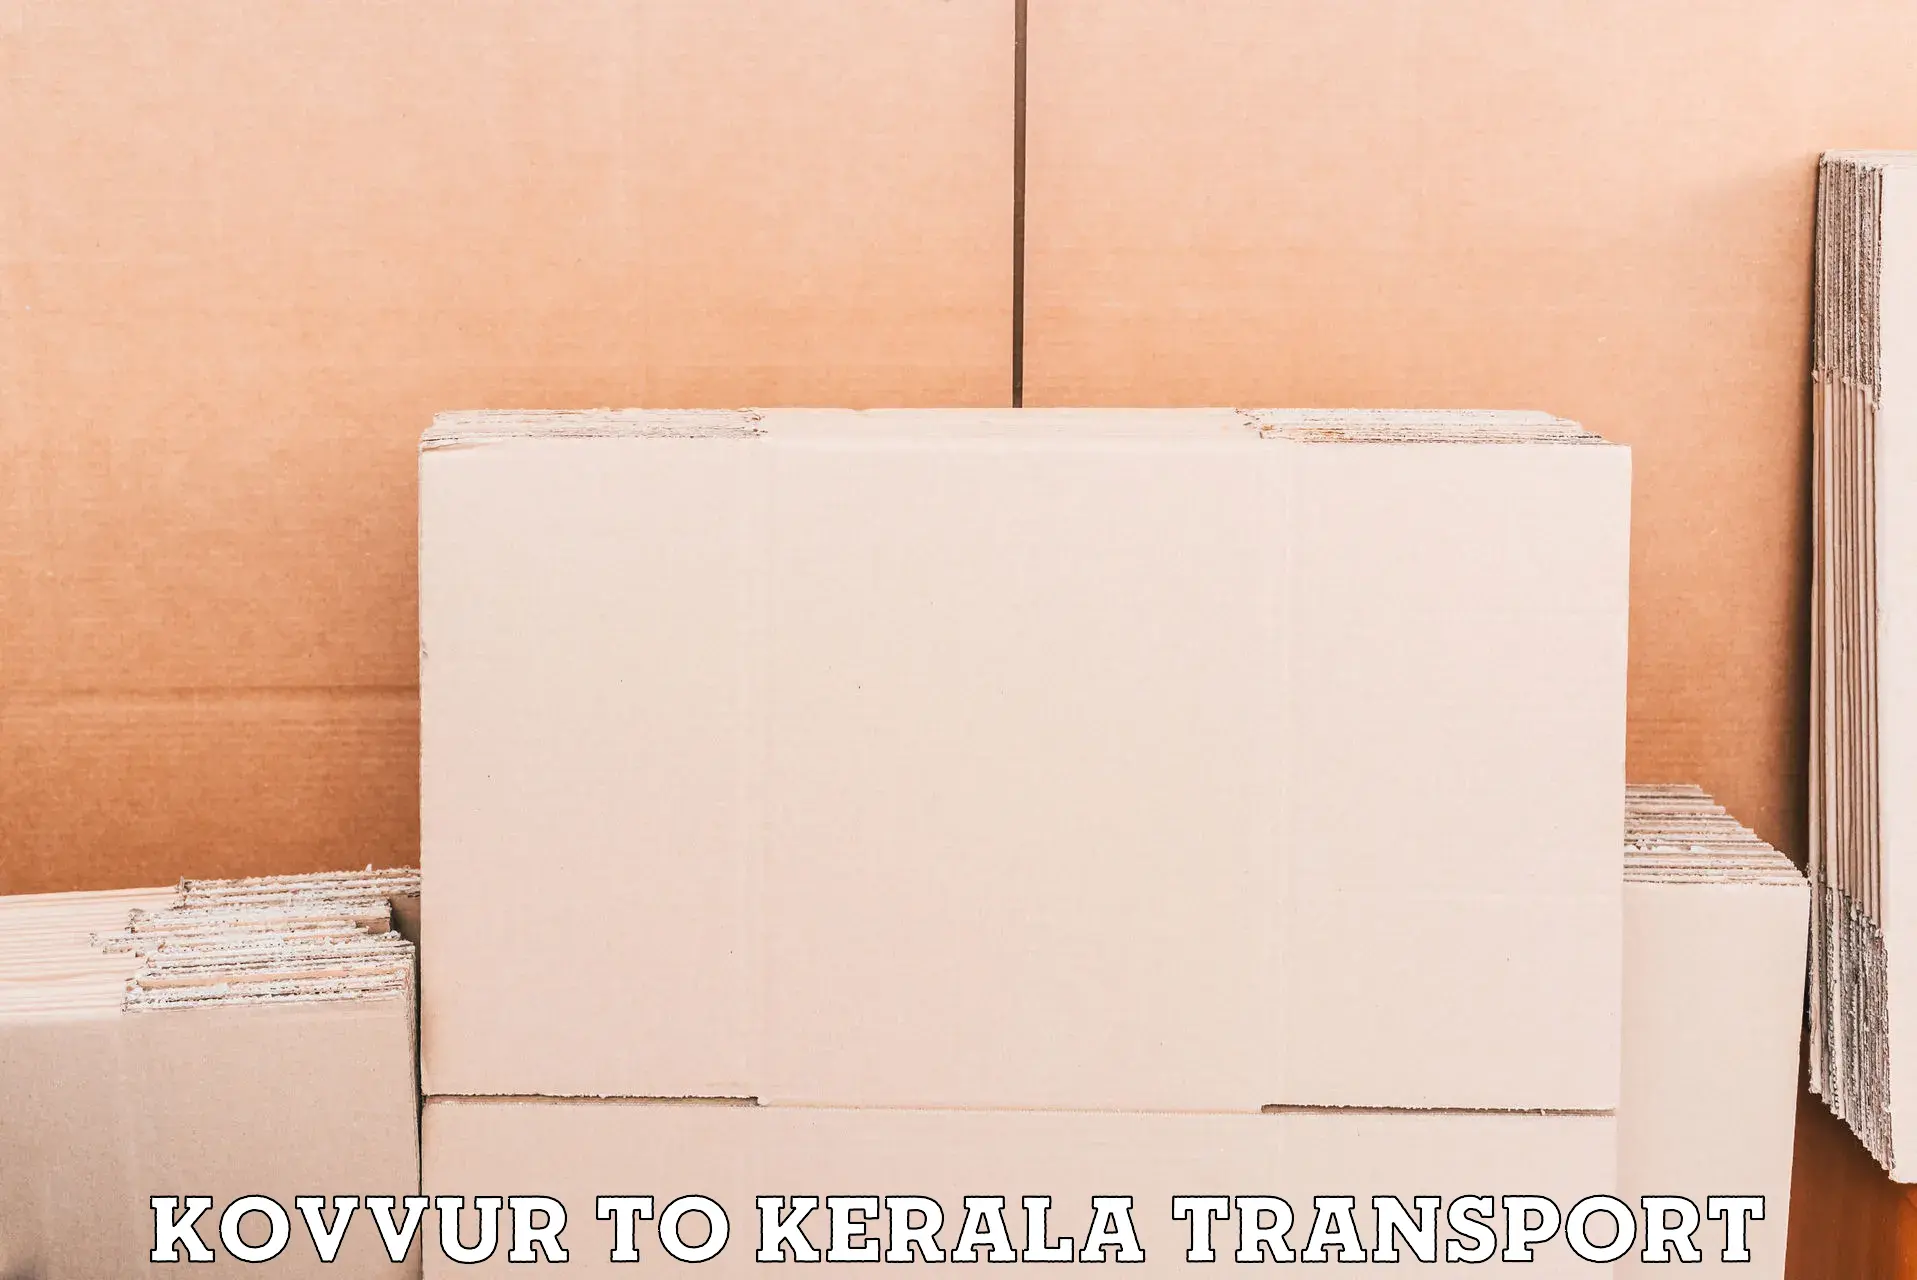 All India transport service Kovvur to Rajamudy